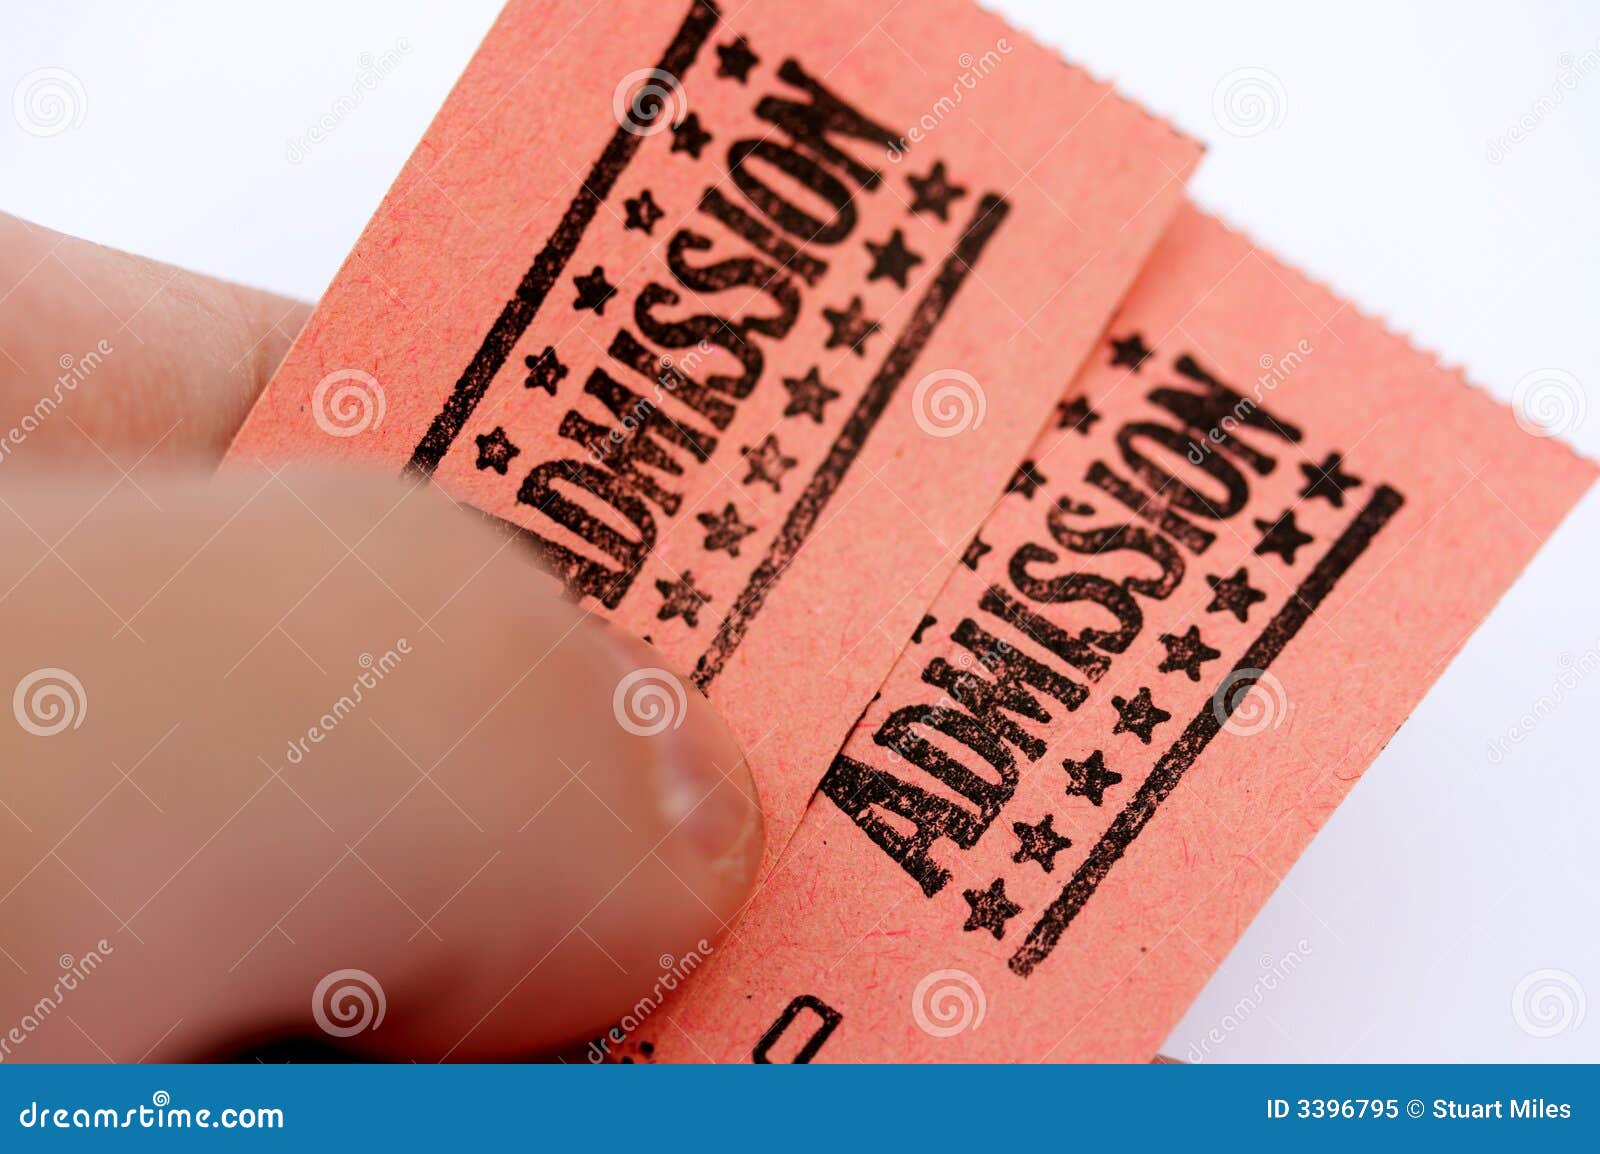 Admission tickets stock image. Image of white, admission 3396795